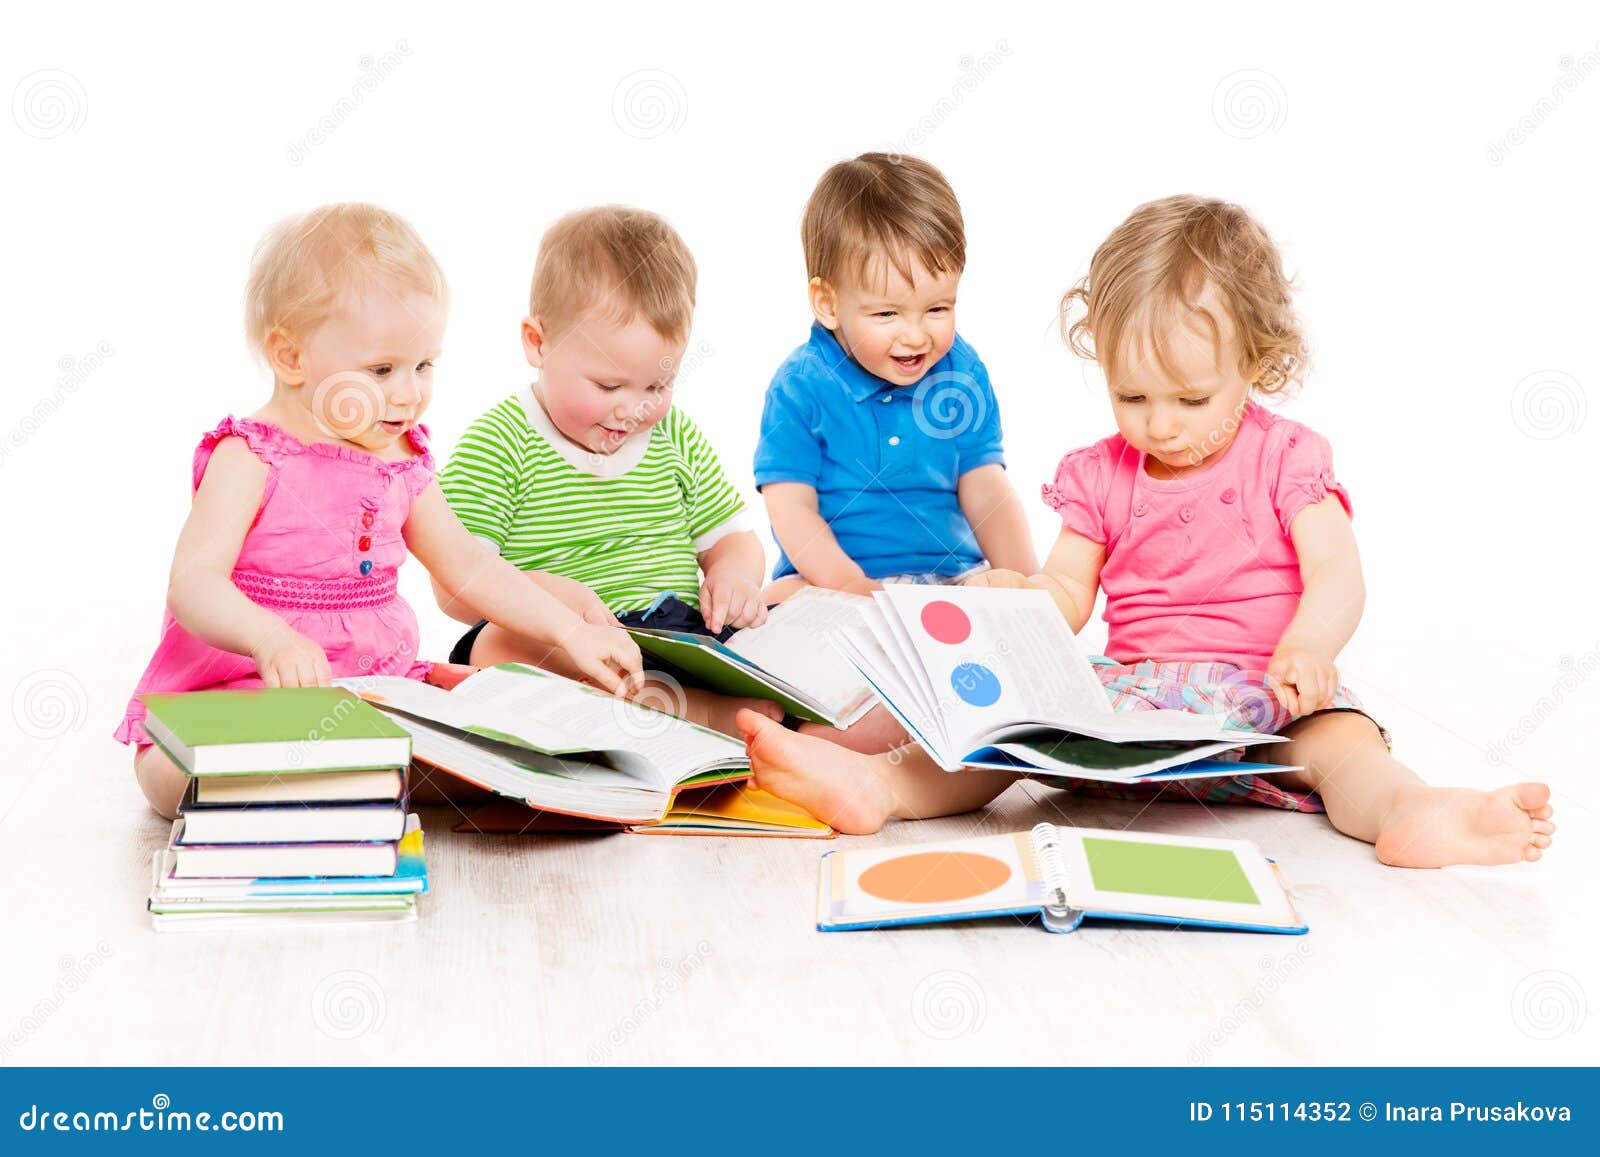 children reading books, babies early education, kids group, white